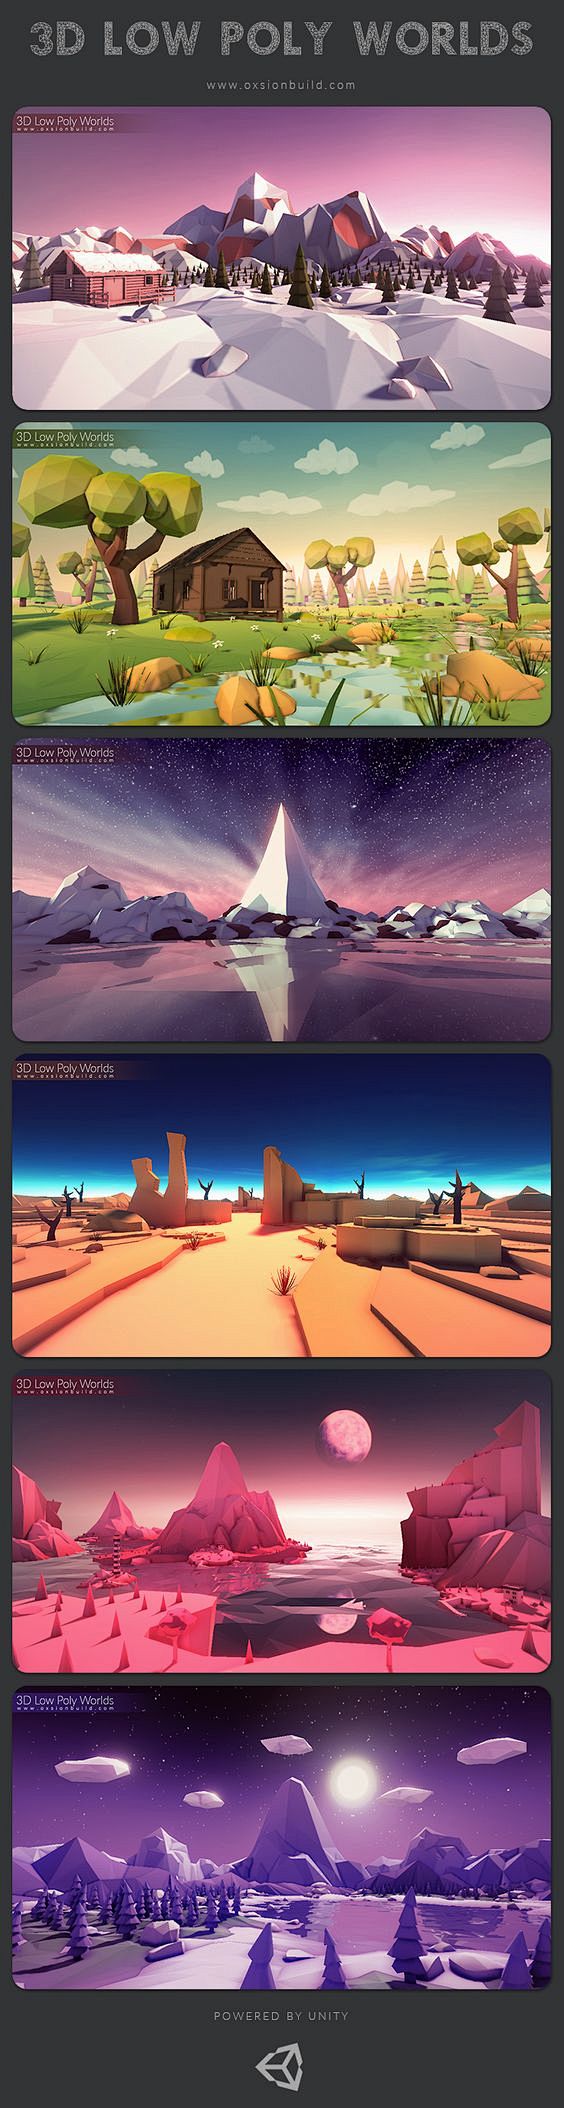 3D Low Poly Worlds